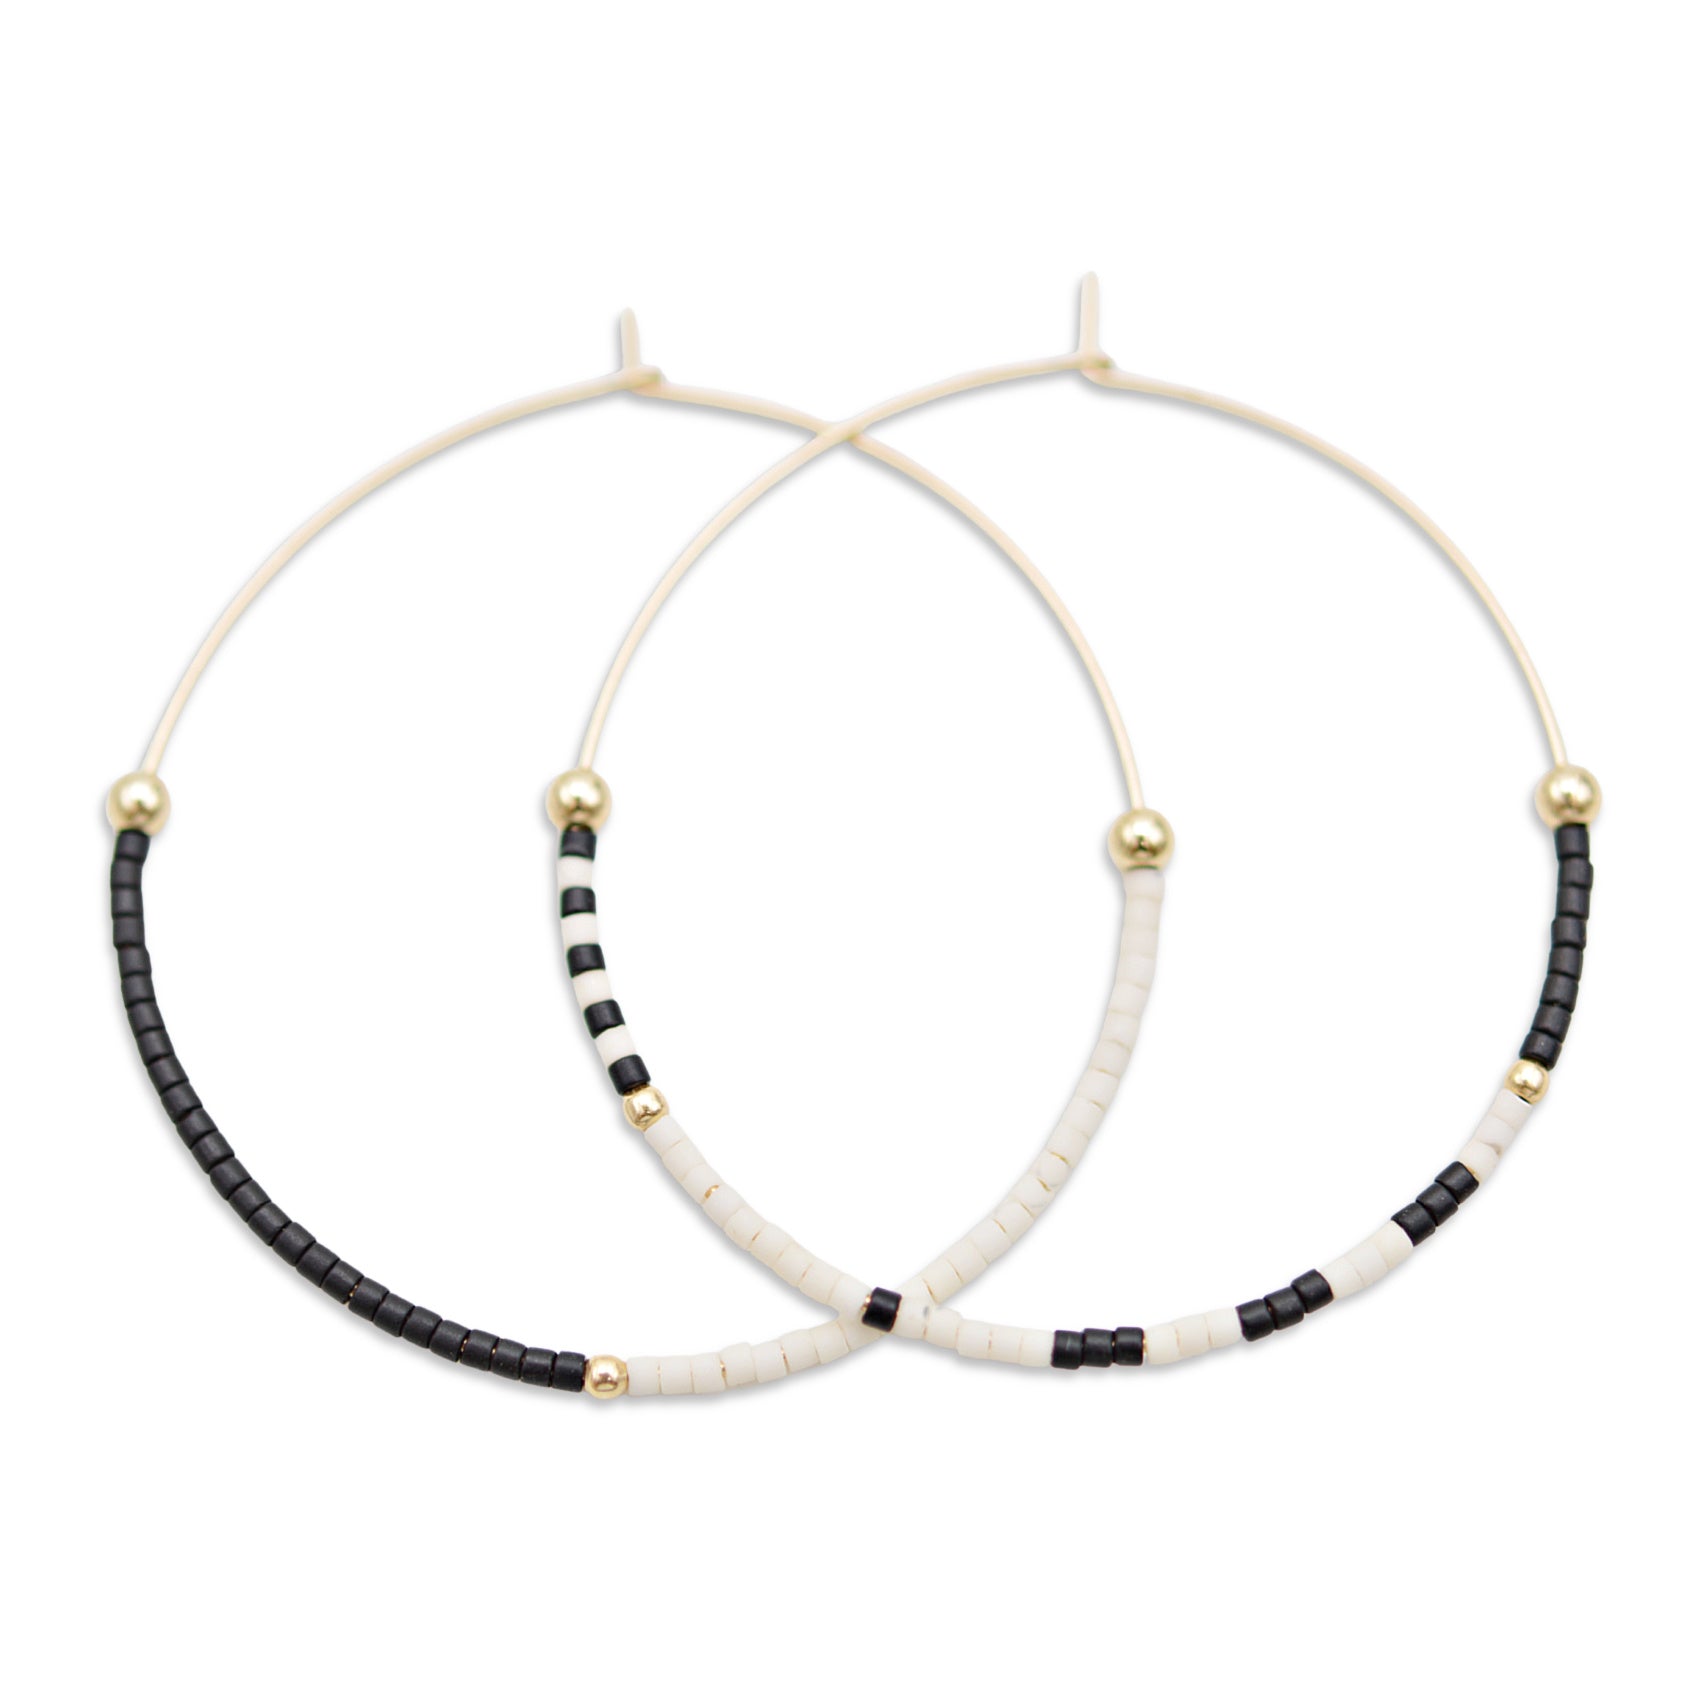 Black and White gold filled hoops